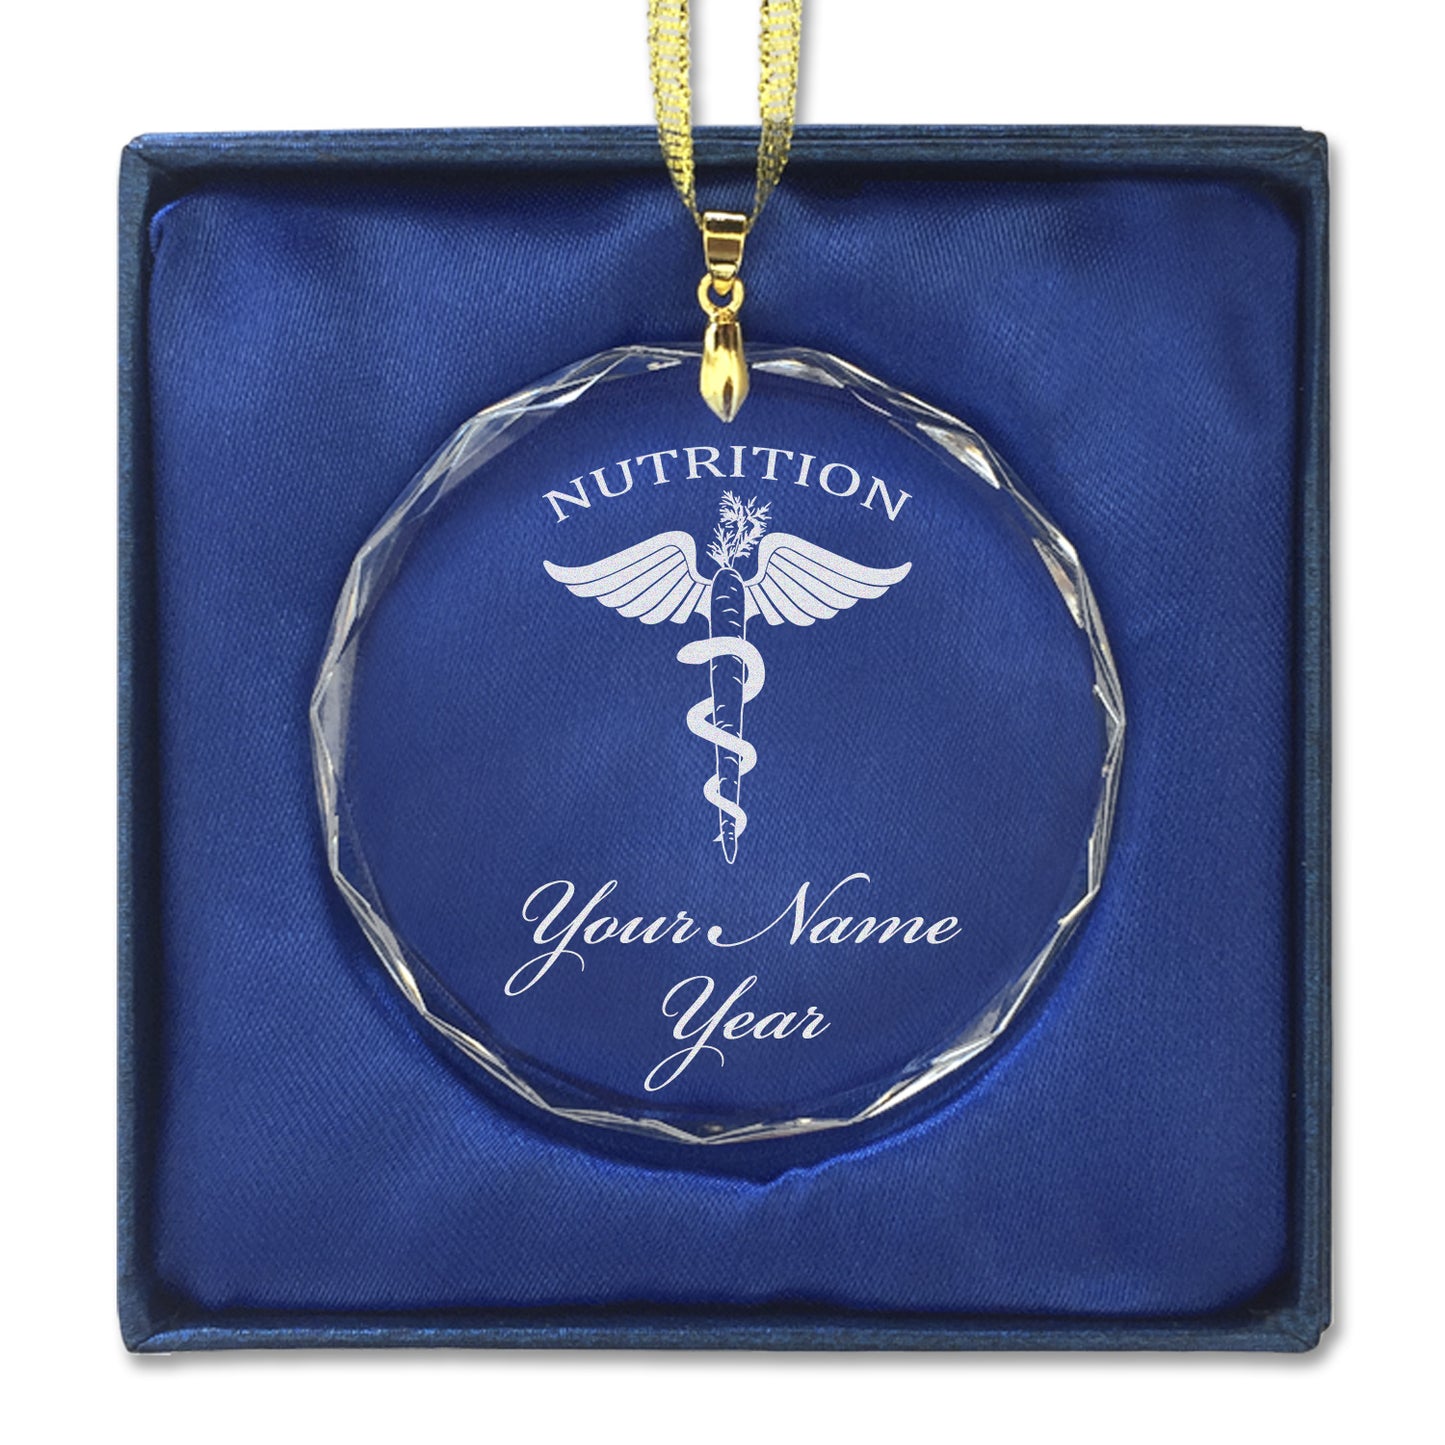 LaserGram Christmas Ornament, Nutritionist, Personalized Engraving Included (Round Shape)